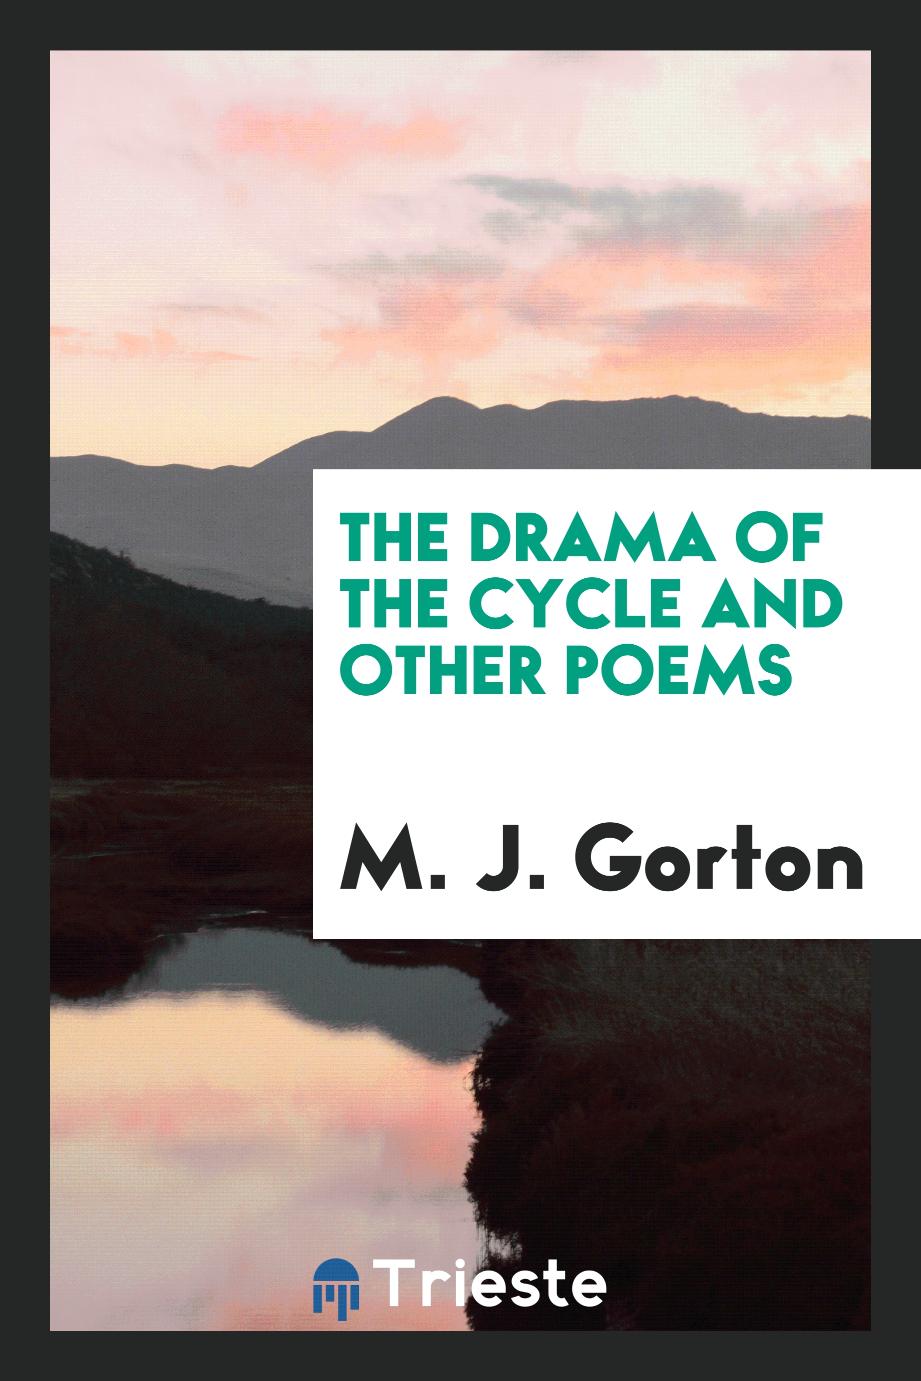 The Drama of the Cycle and Other Poems